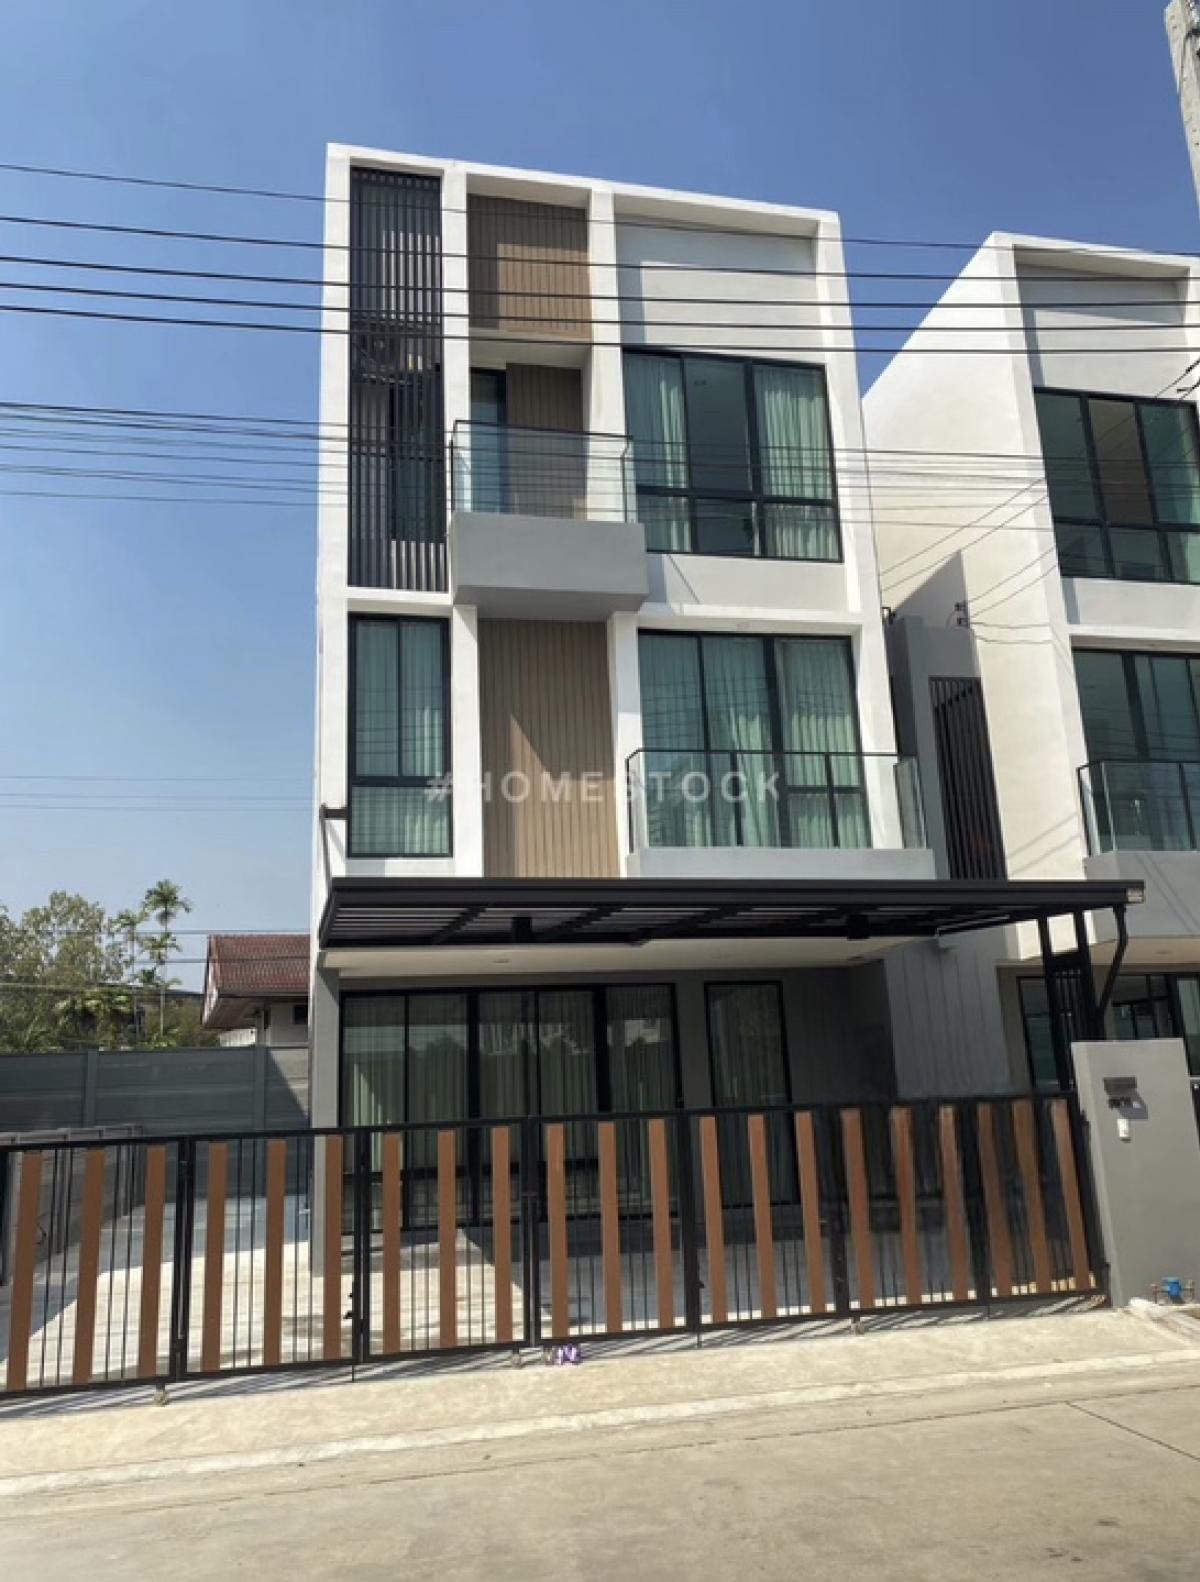 For RentHome OfficeVipawadee, Don Mueang, Lak Si : 62,000.-3-story home office for rent, Nue Noble Connex Project, Nue Noble Connex House, Don Mueang, near Don Mueang Airport, near the BTS Skytrain, opposite Annex Market.